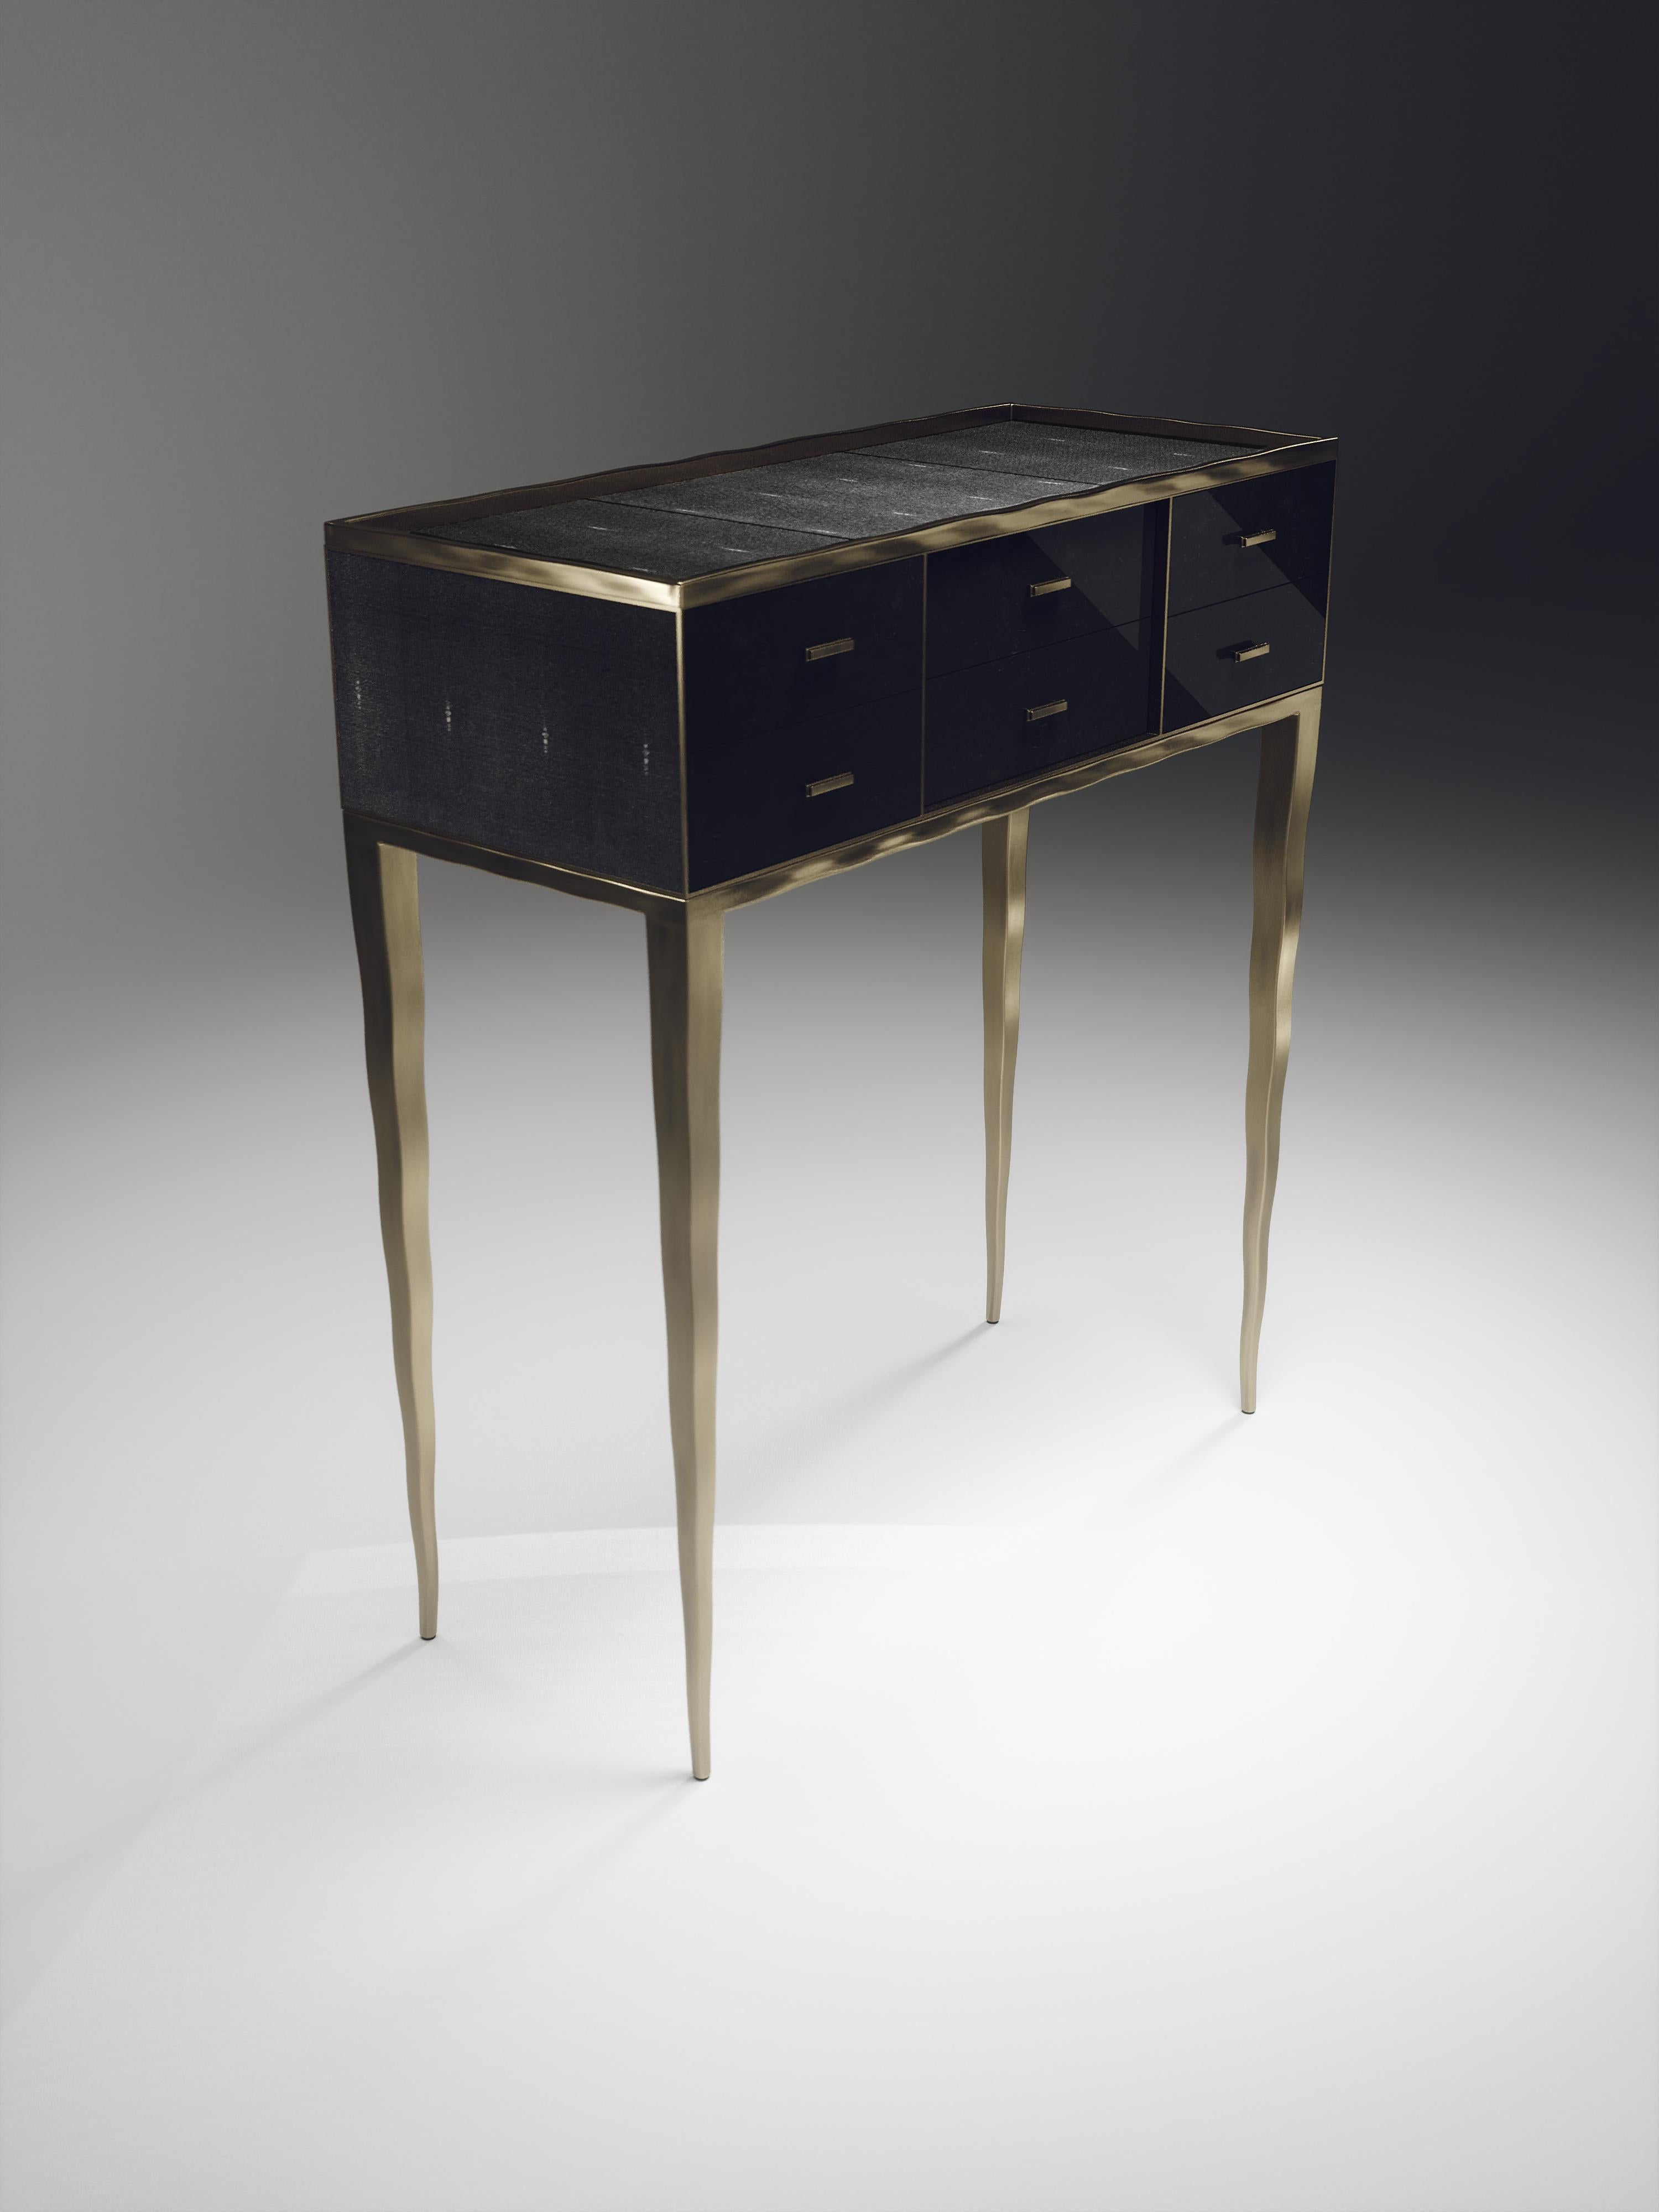 The melting cosima console table by R & Y Augousti is a stunning multi-faceted piece. The beautiful signature 